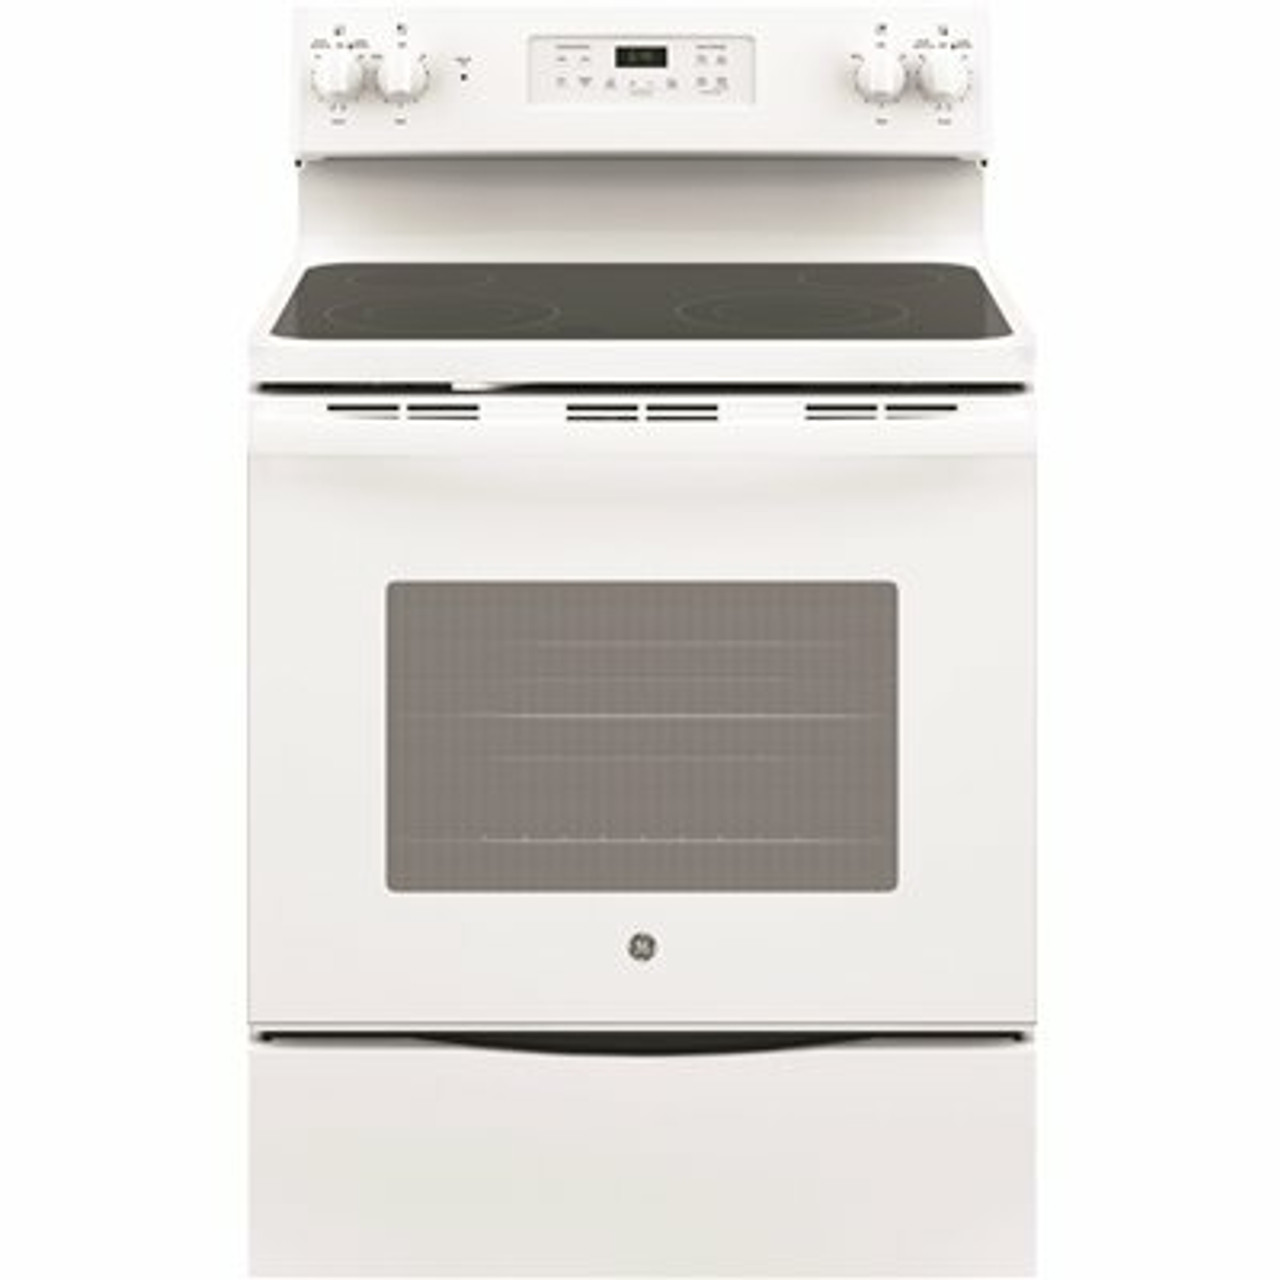 Ge 30 In. 5.3 Cu. Ft. Electric Range With Self-Cleaning Oven In White - 1029102